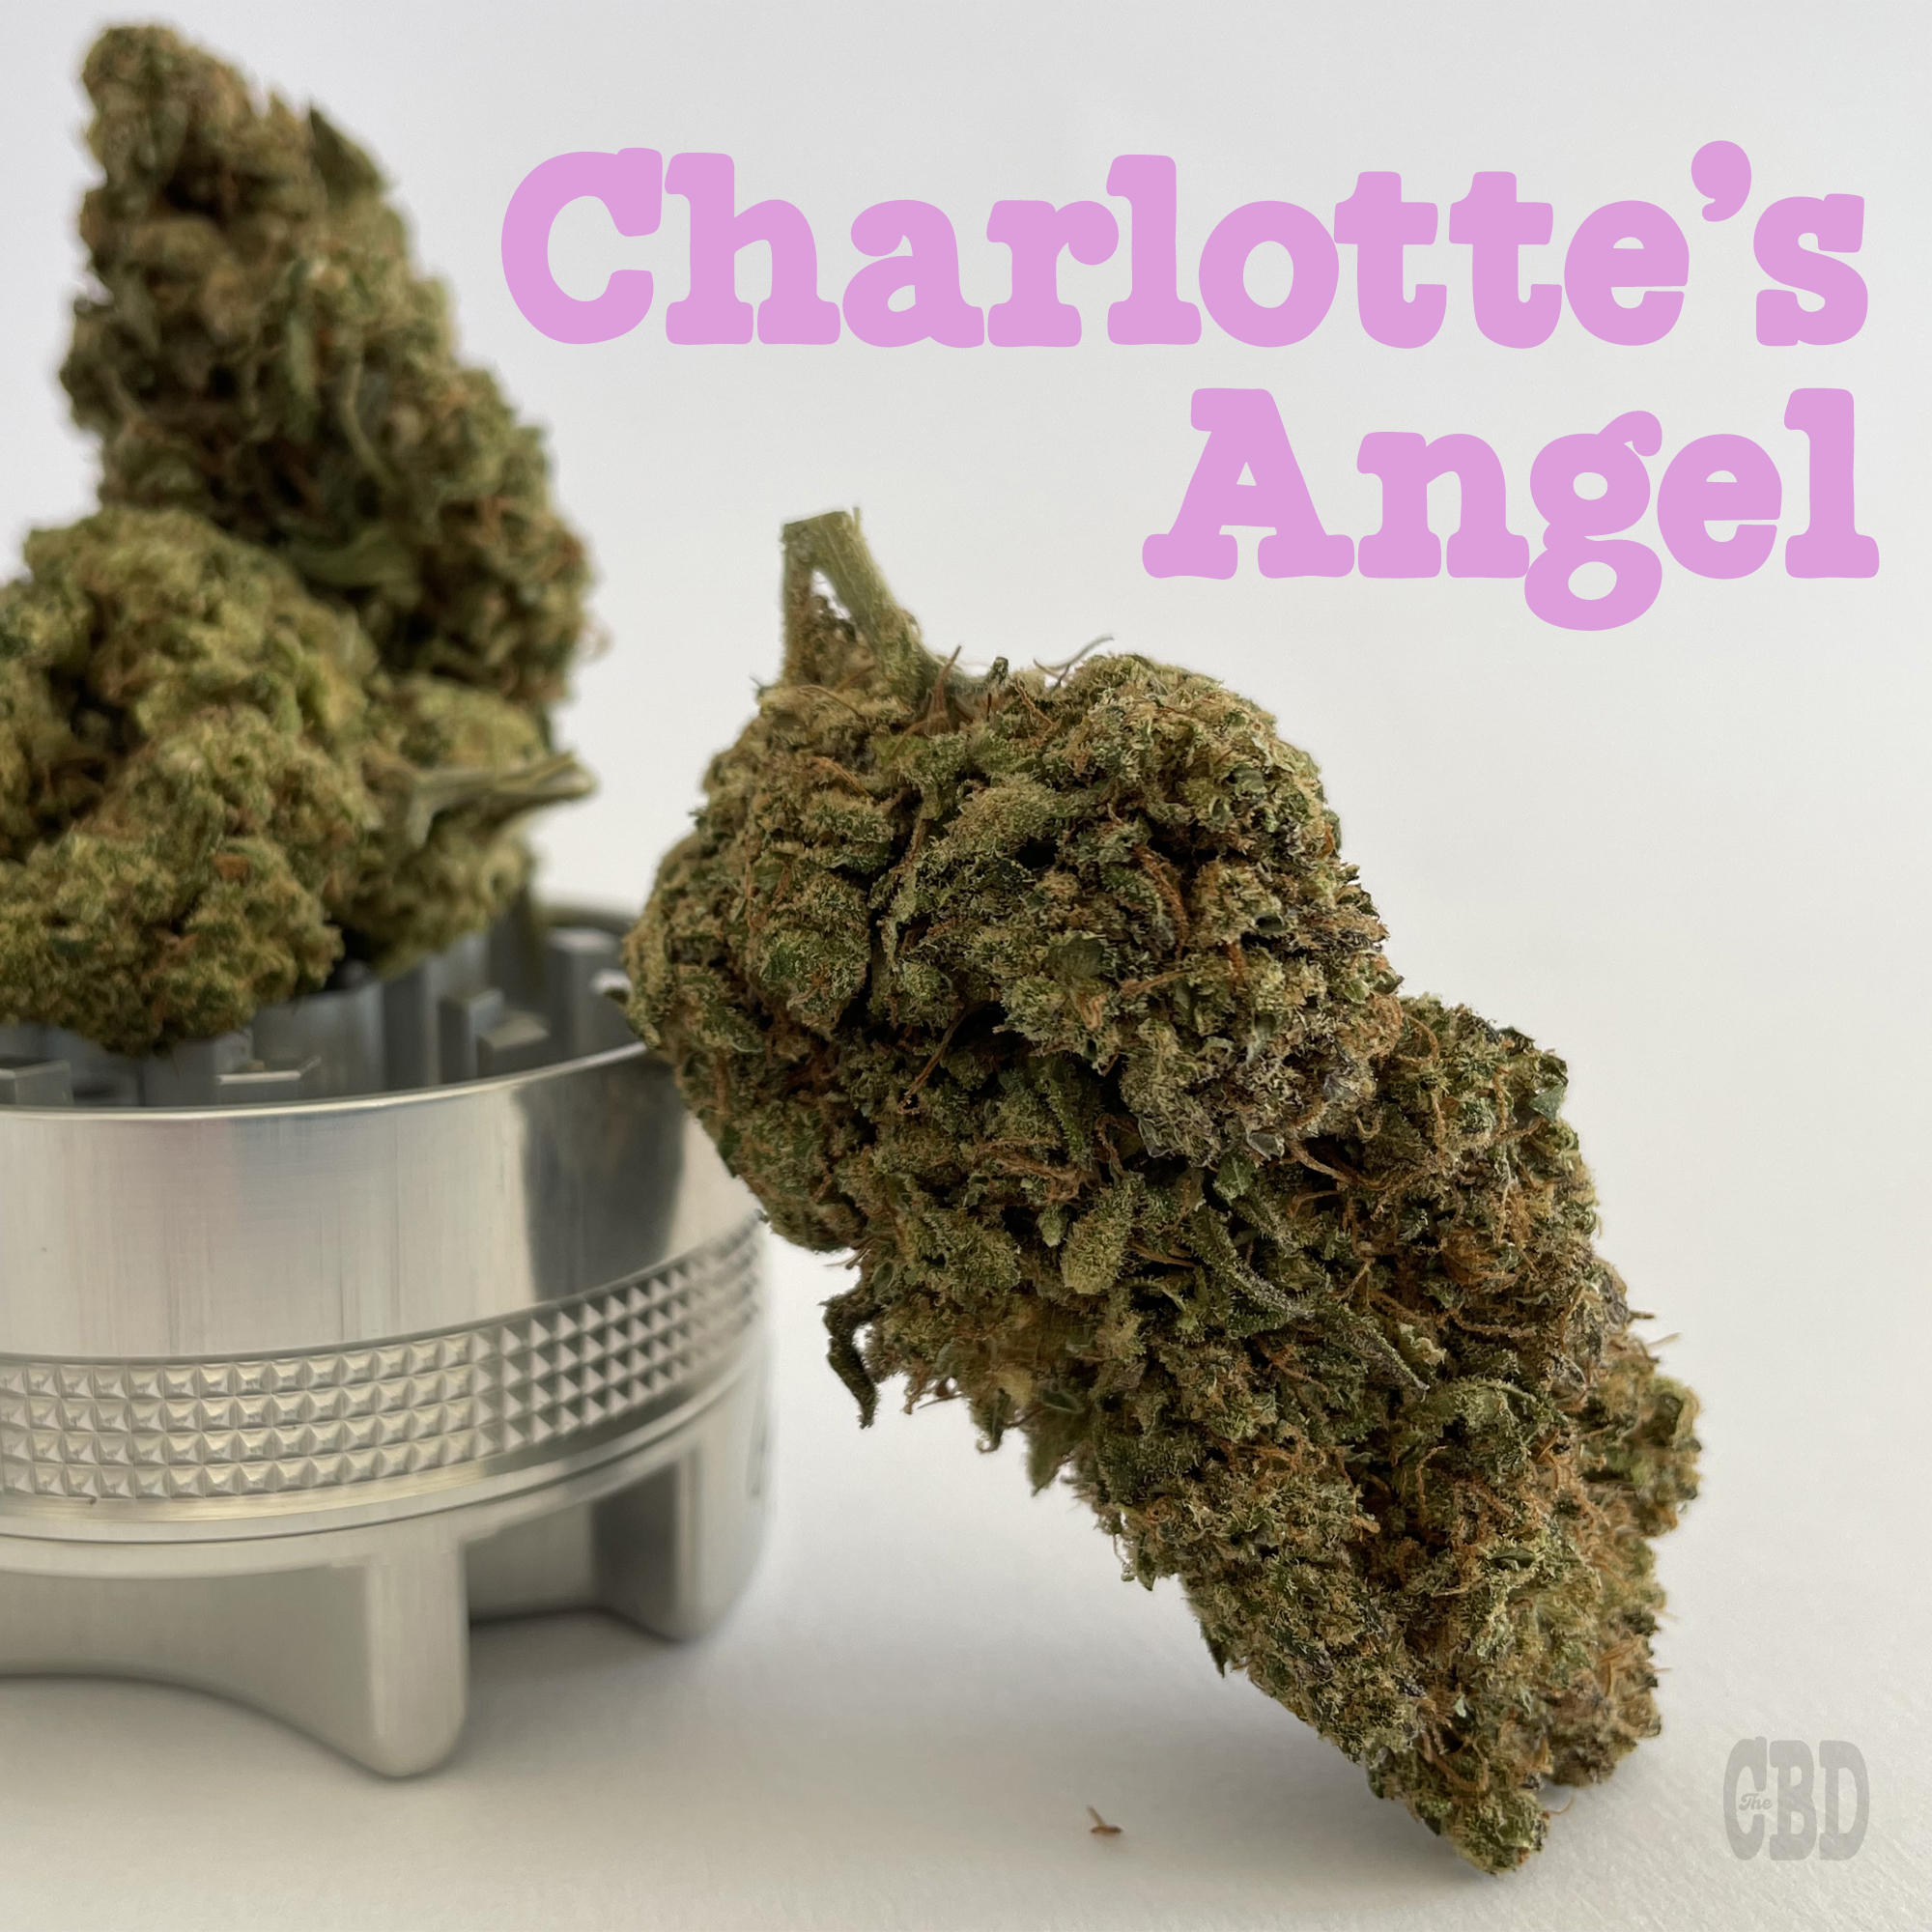 Charlotte's Angel CBD by Thecbdstore - 1